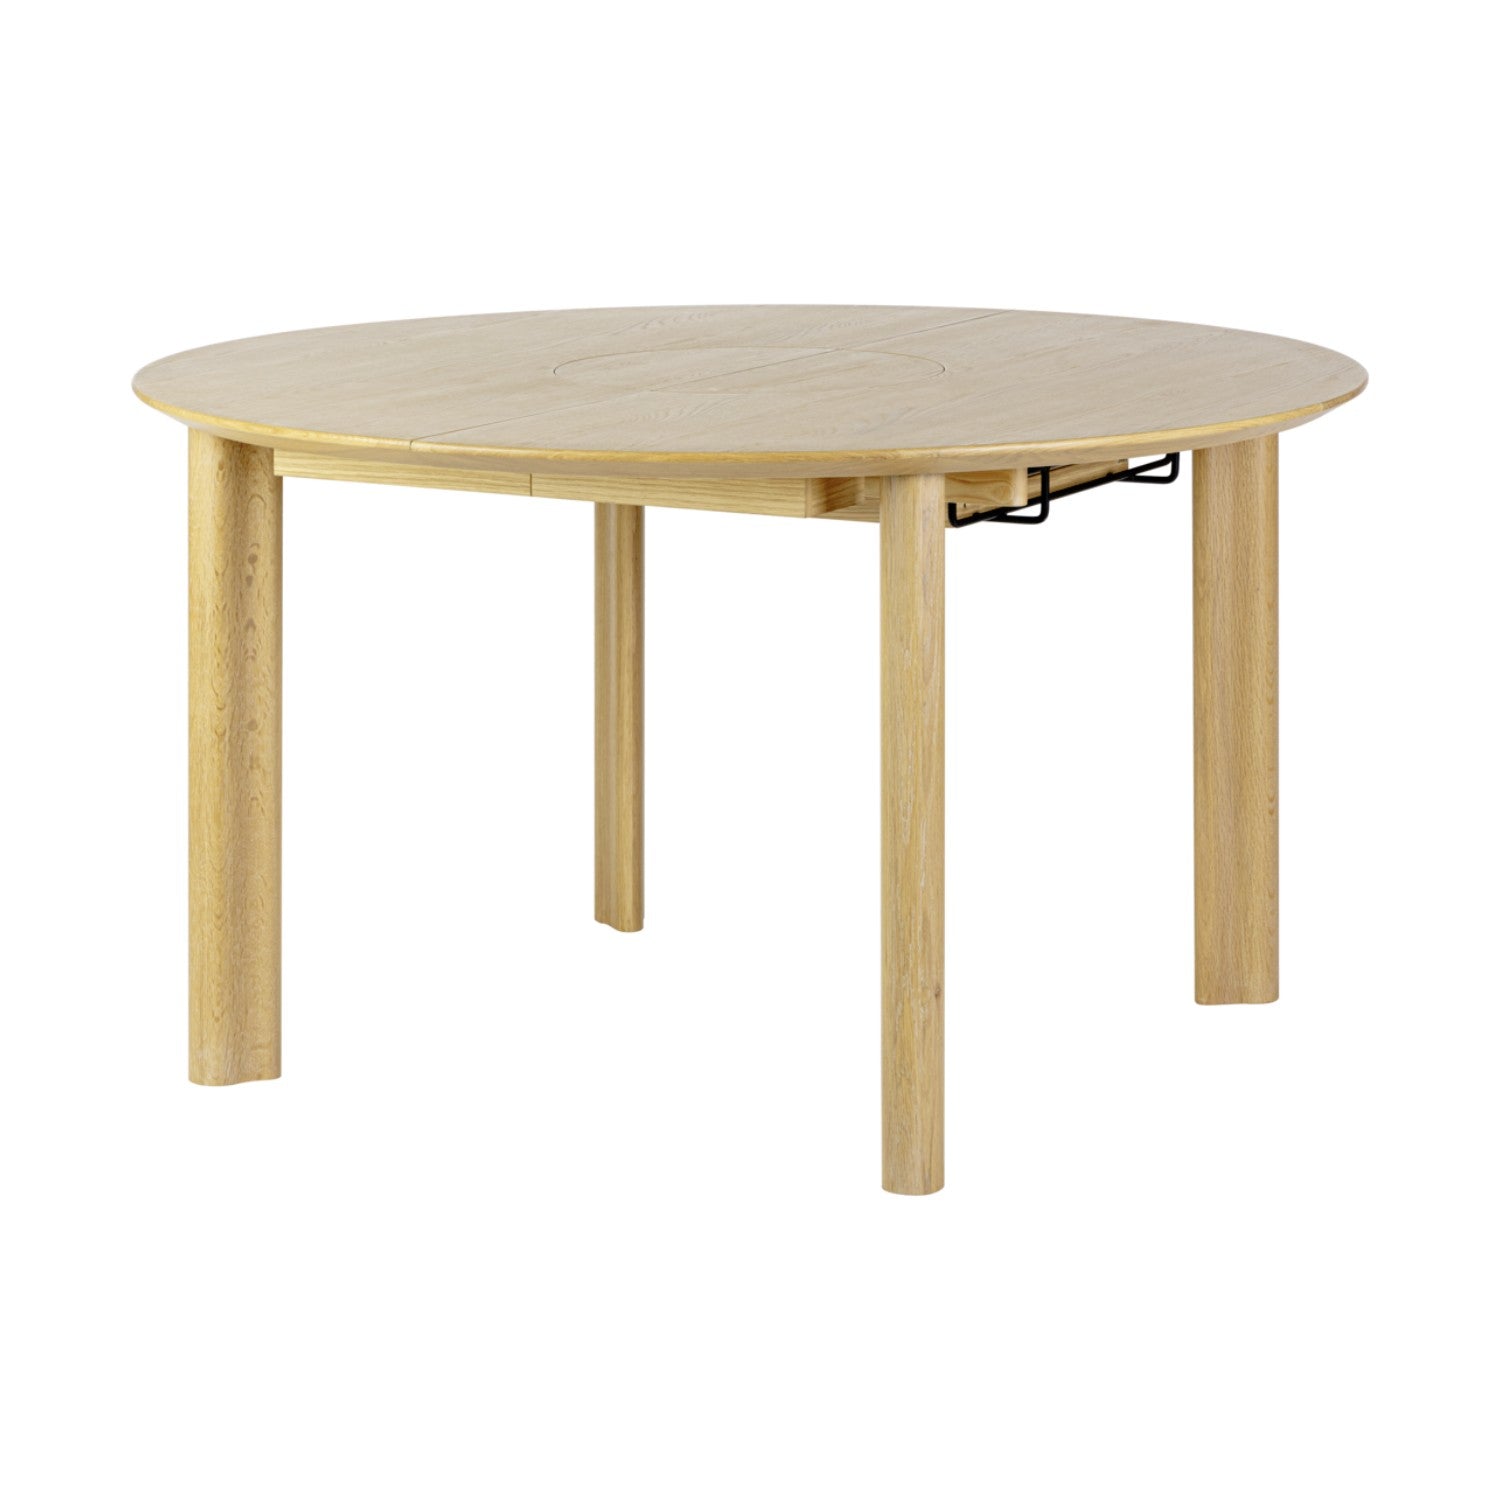 COMFORT CIRCLE WITH EXTENSION - Dining Table